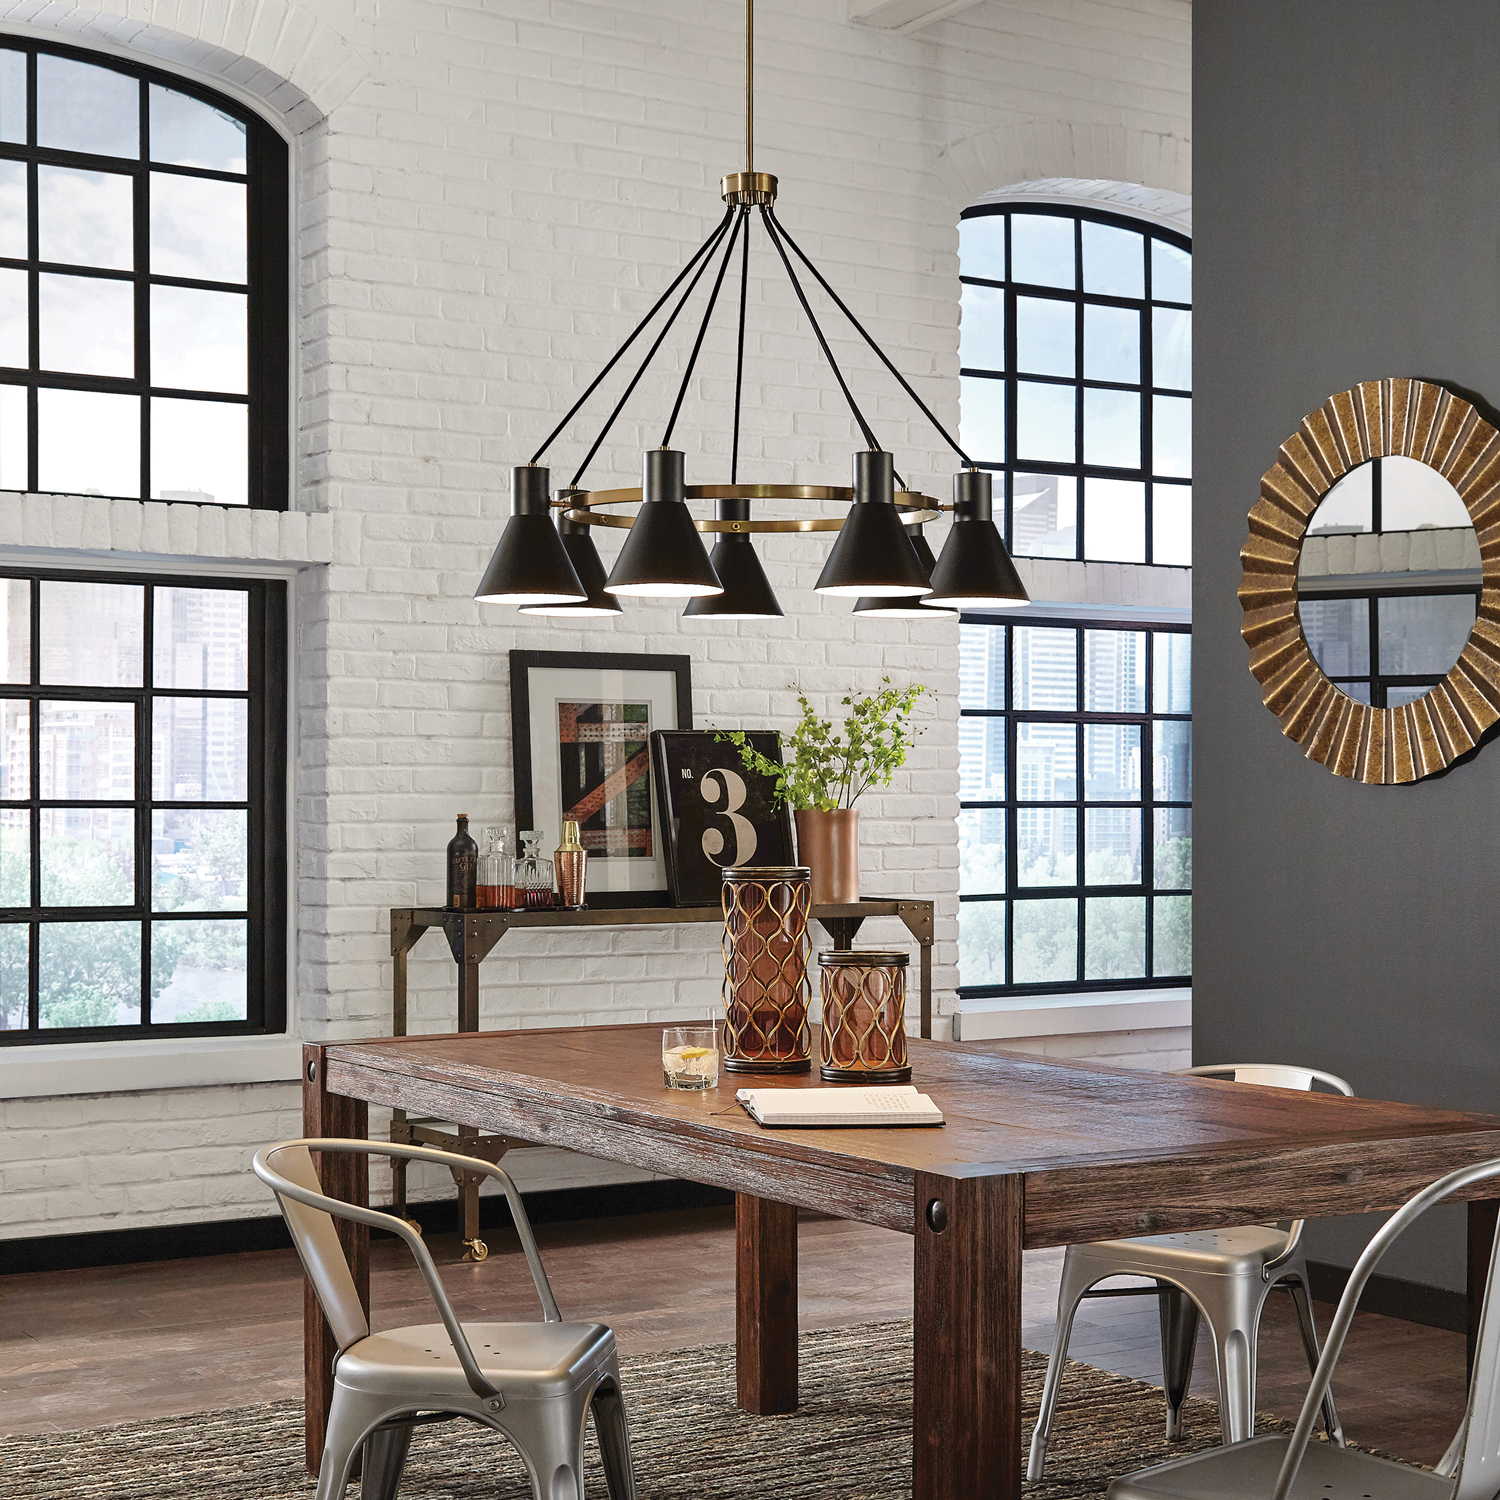 Towner Chandelier above an industrial table.